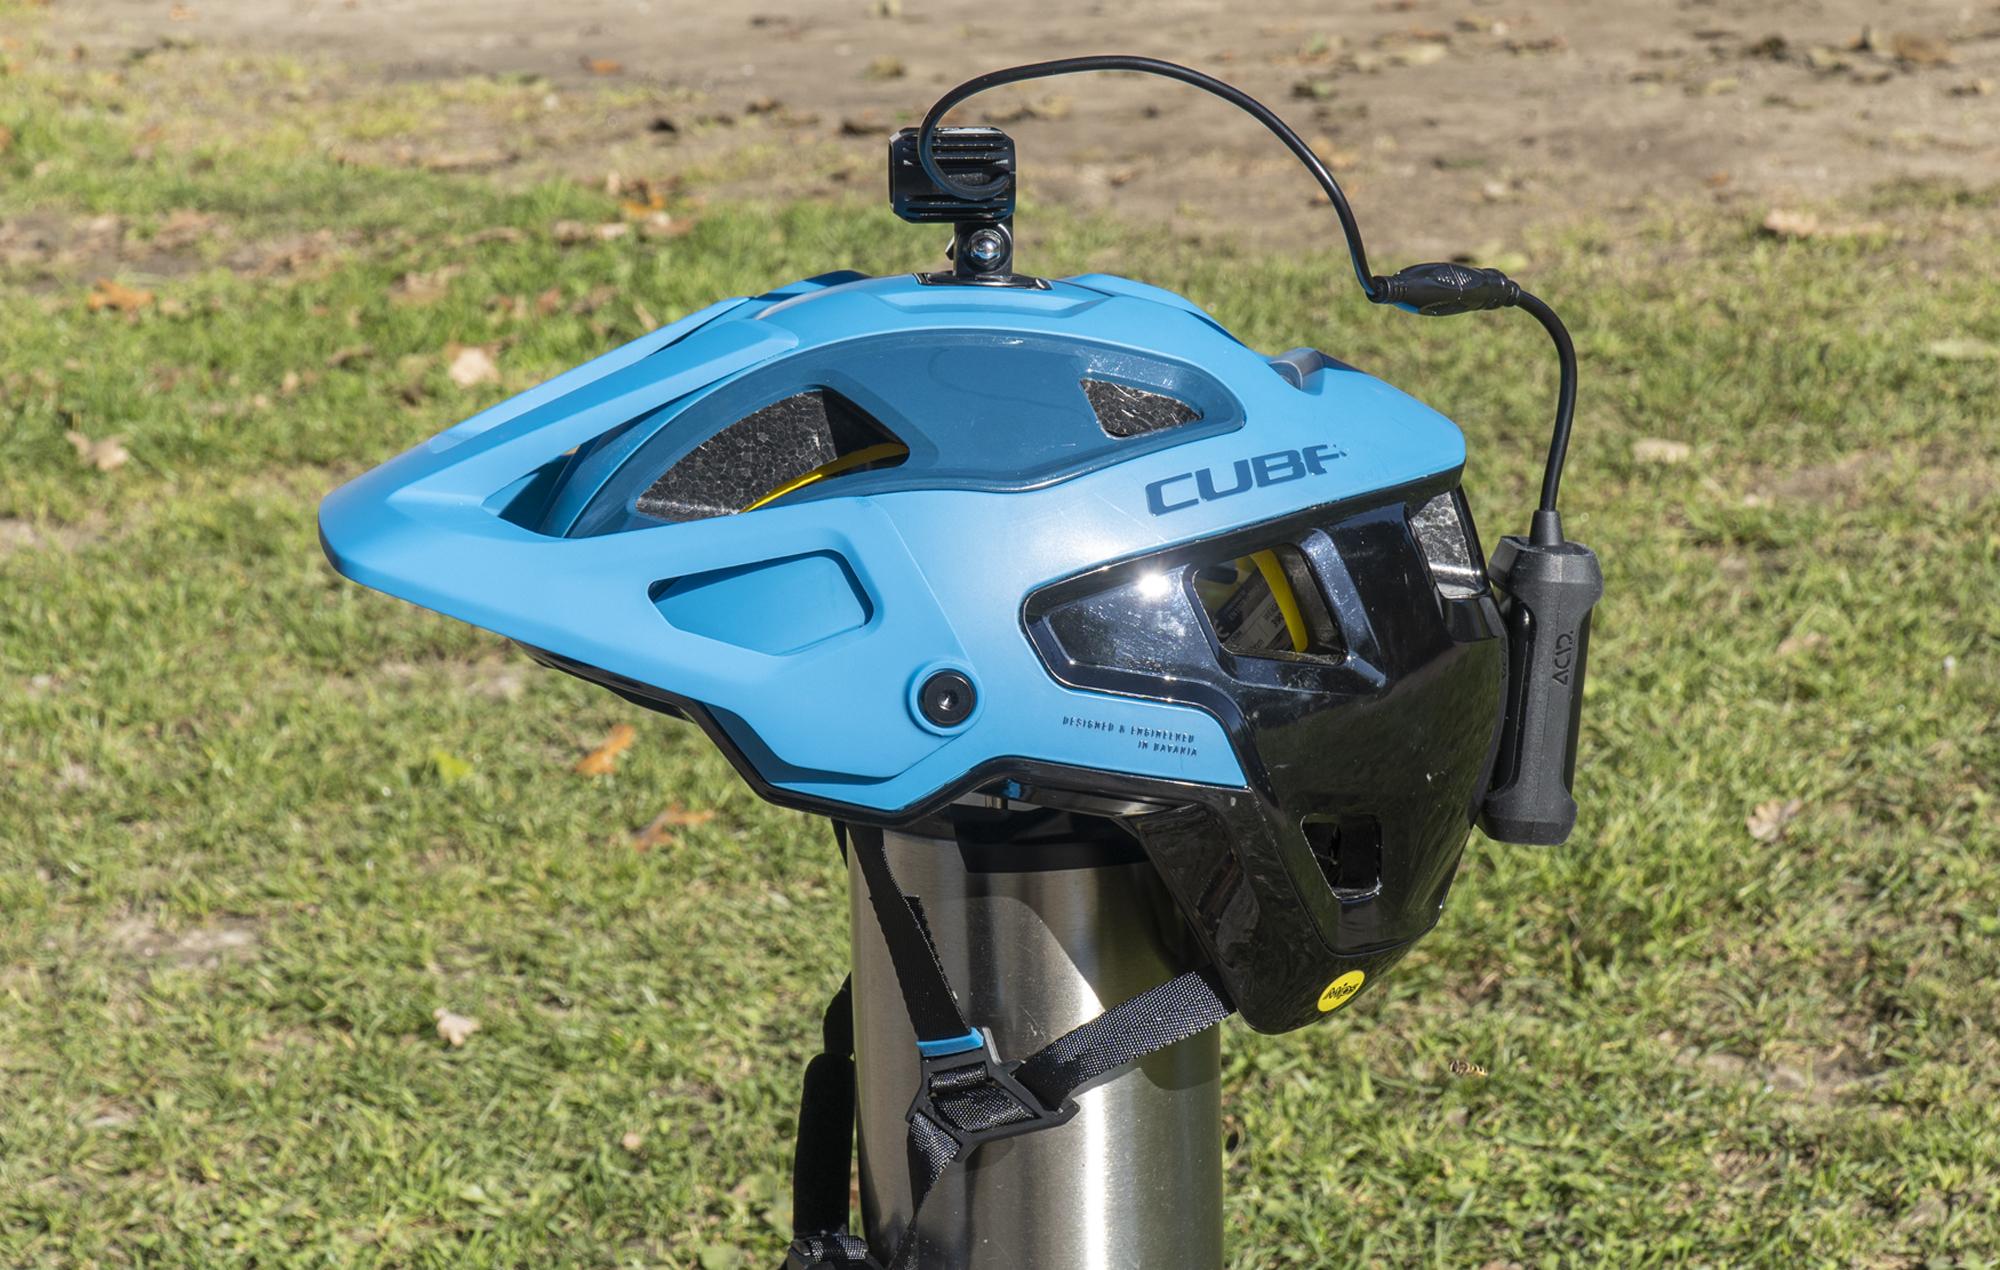 Test Cube Strover Helm und Acid HPA 2000 Lampe